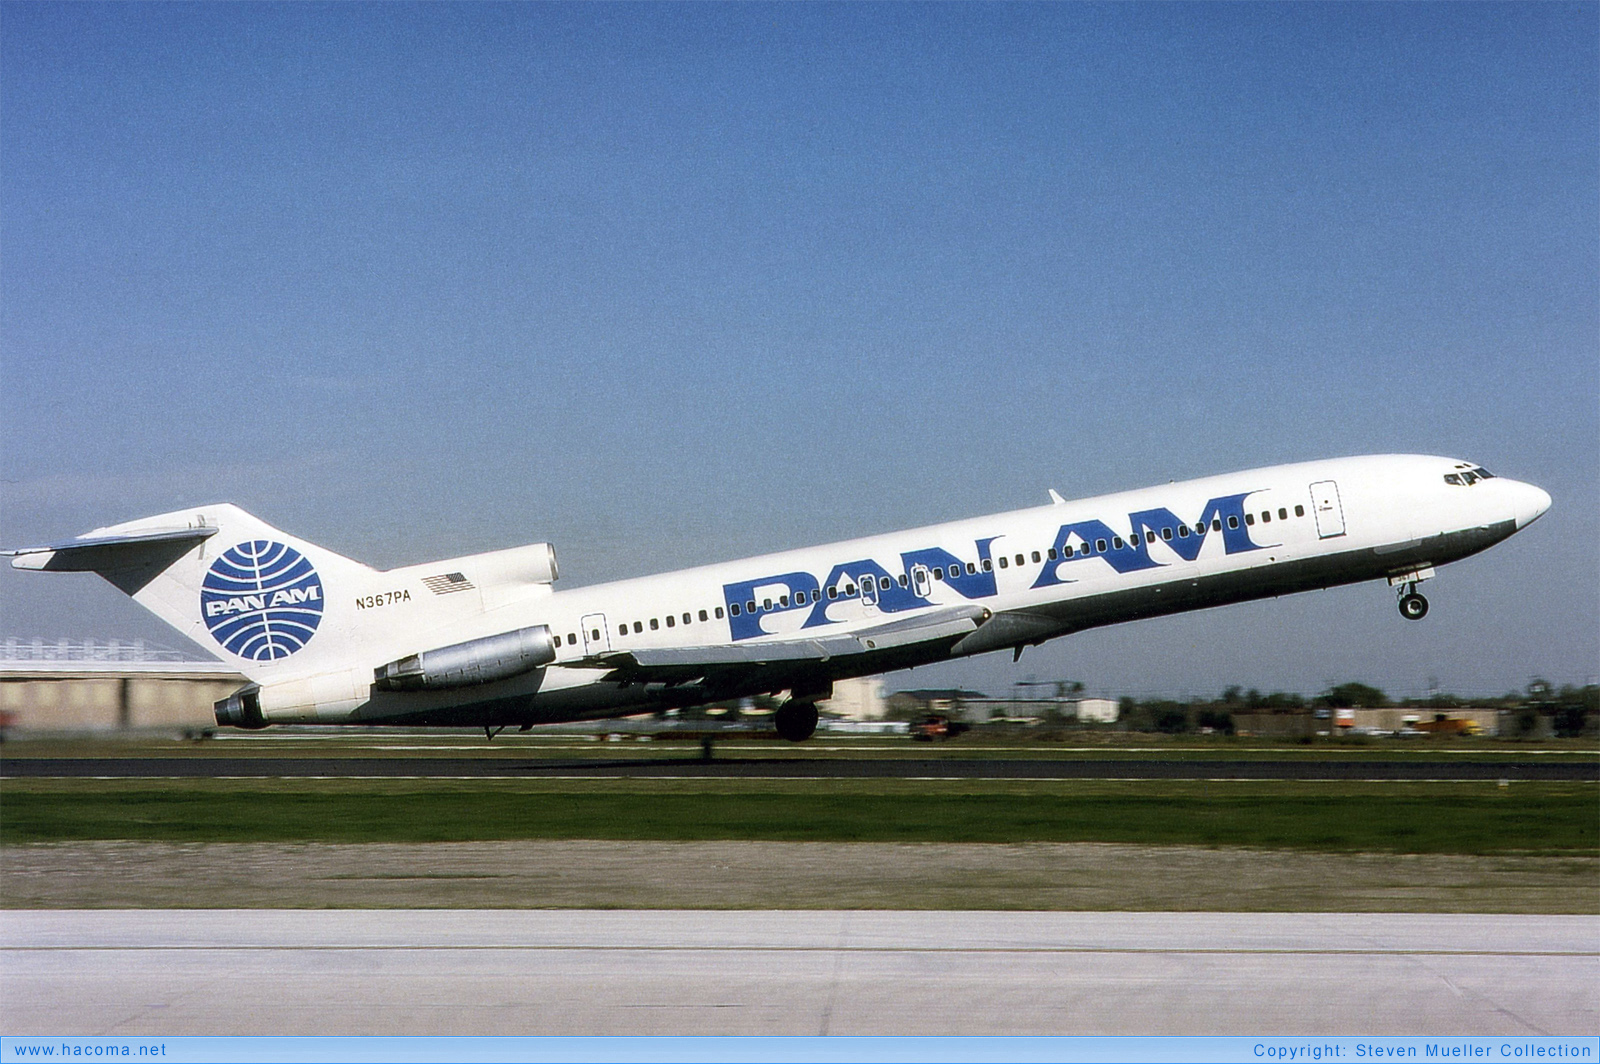 Photo of N367PA - Pan Am Clipper Matchless - Miami International Airport